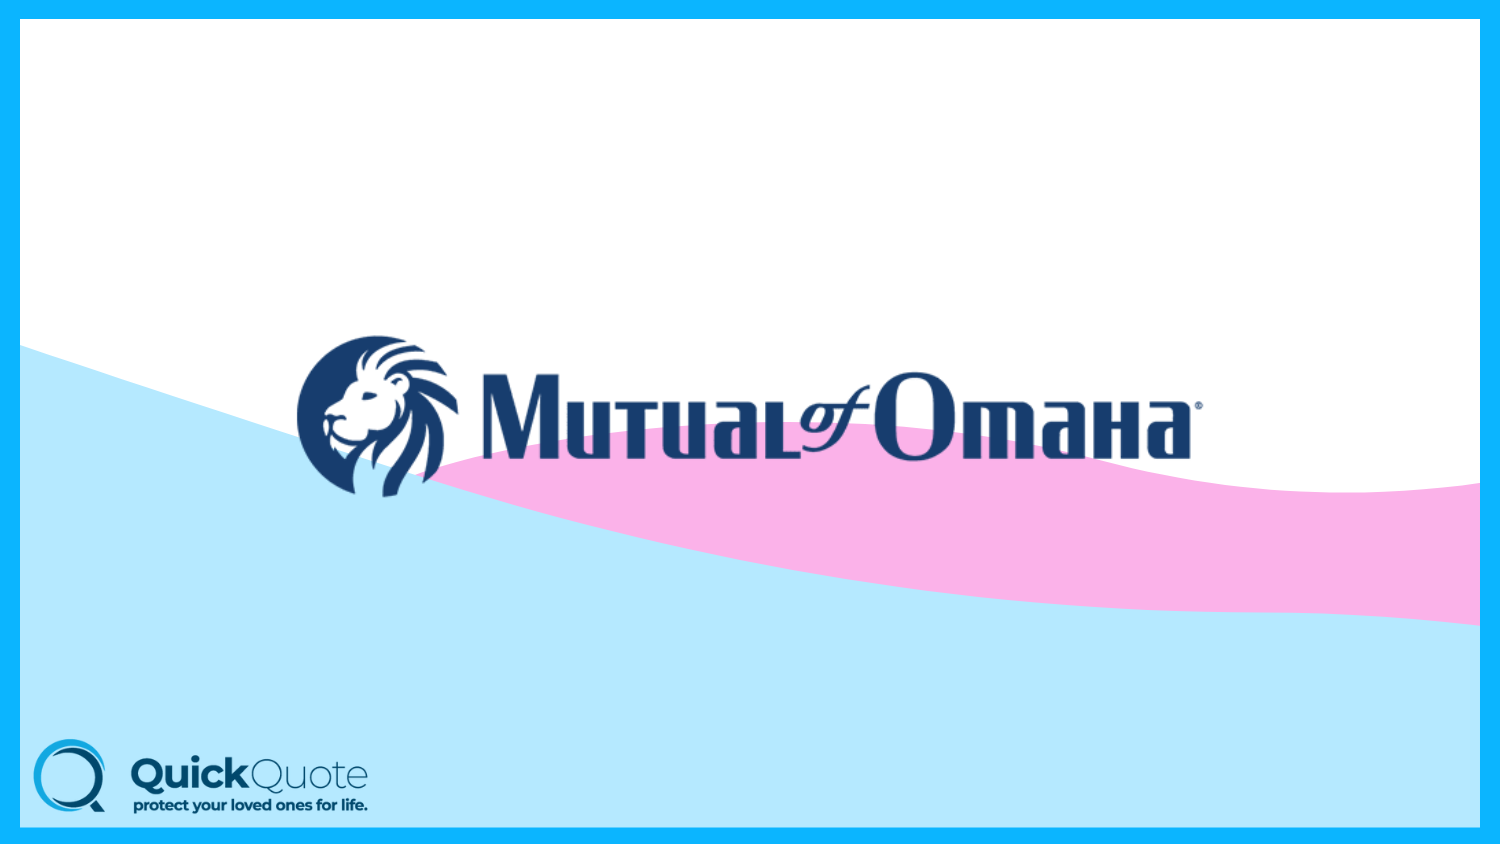 Best Life Insurance for Children: Mutual of Omaha